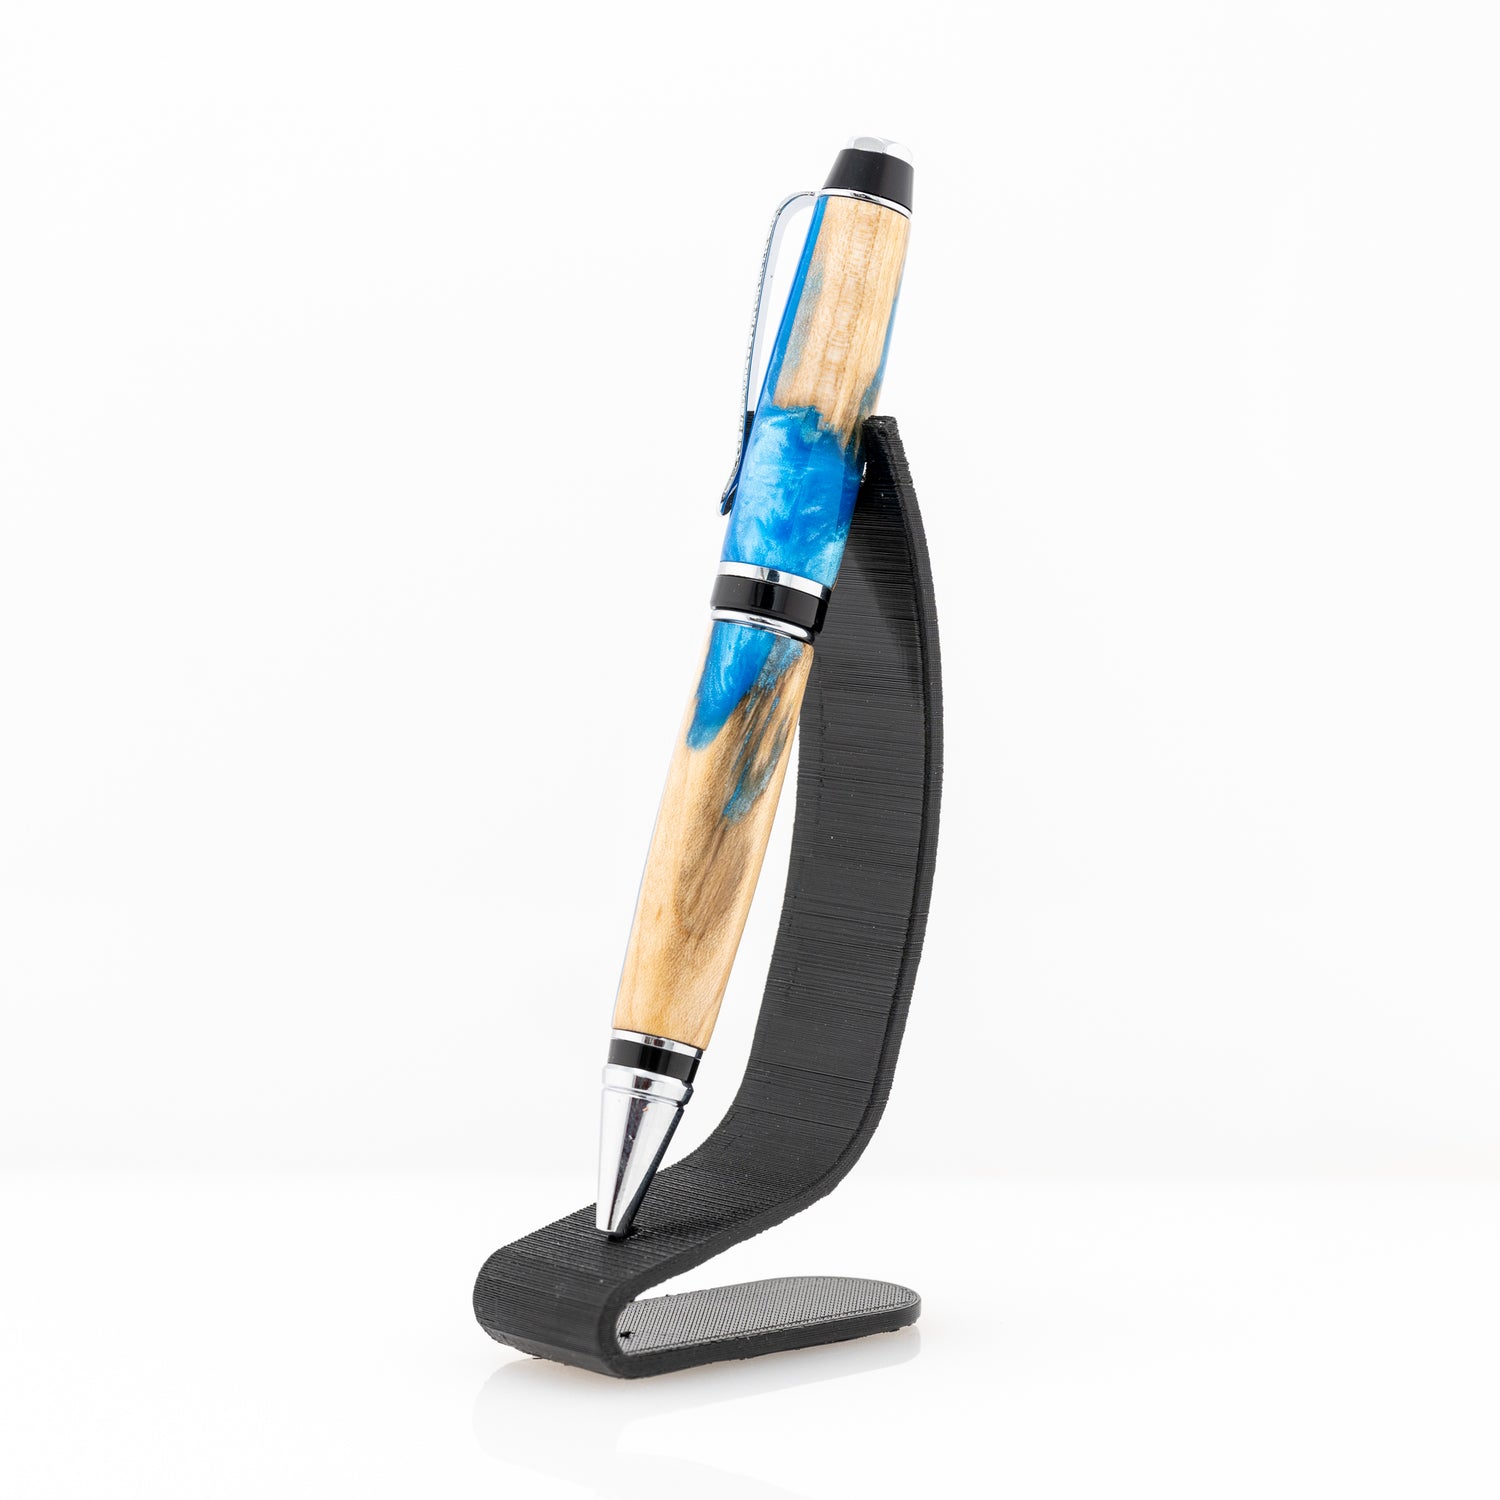 A handmade maple wood and blue resin twist cigar pen on a stand